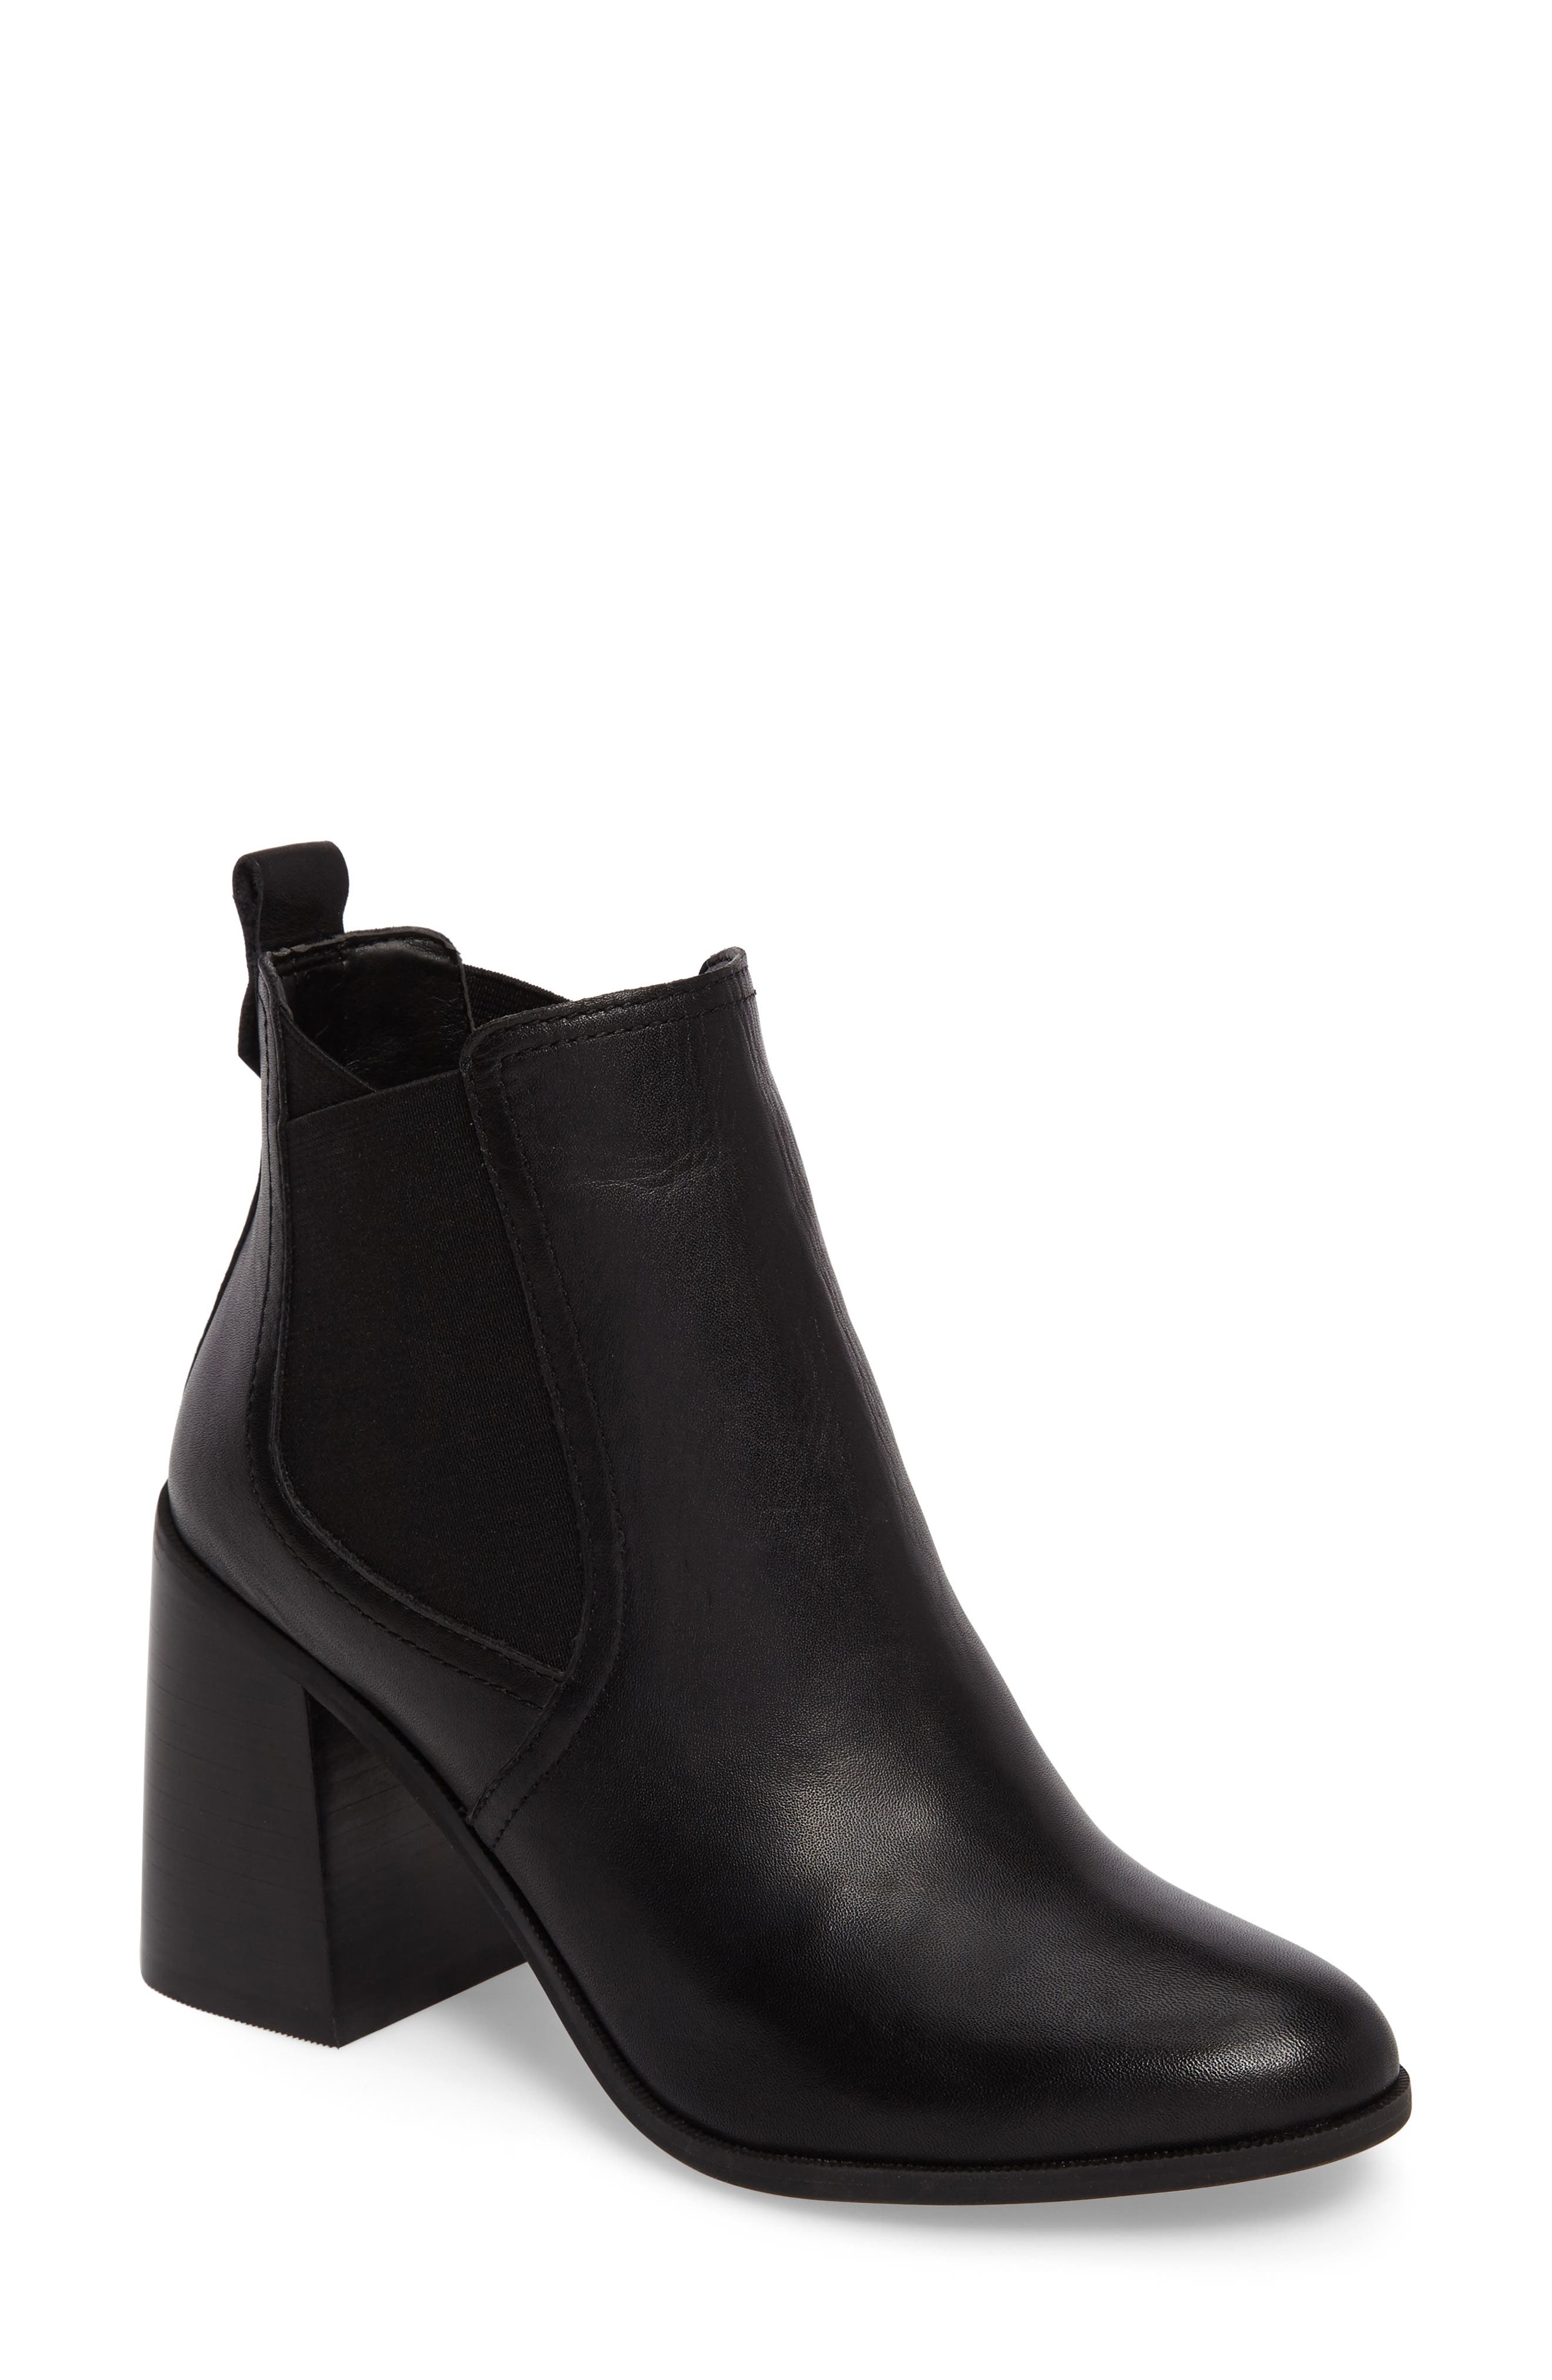 Booties and Ankle Boots for Women | Nordstrom